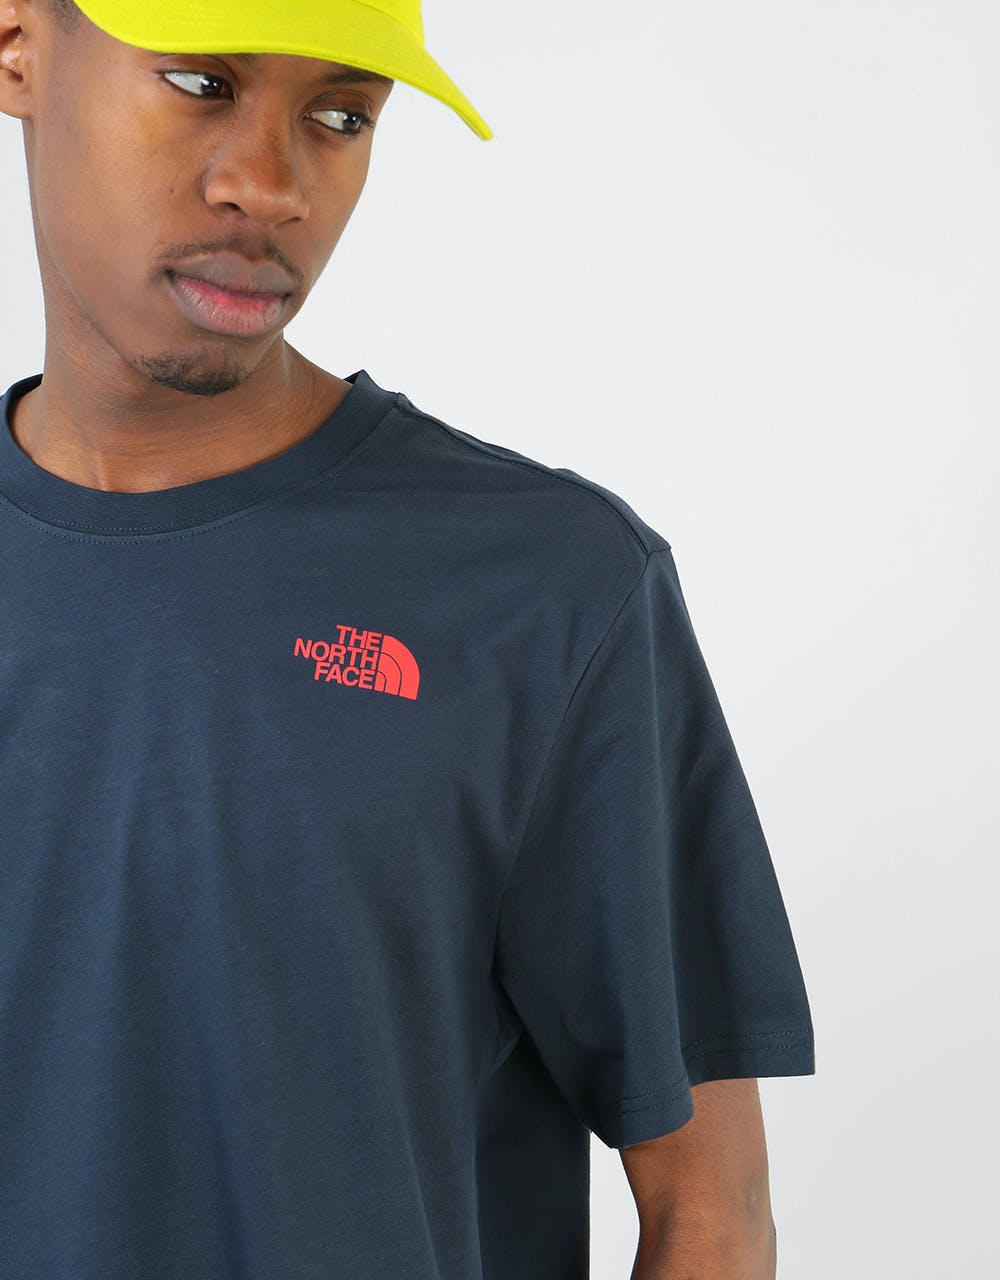 The North Face S/S Red Box Celebration T-Shirt - Urban Navy/Fiery Red